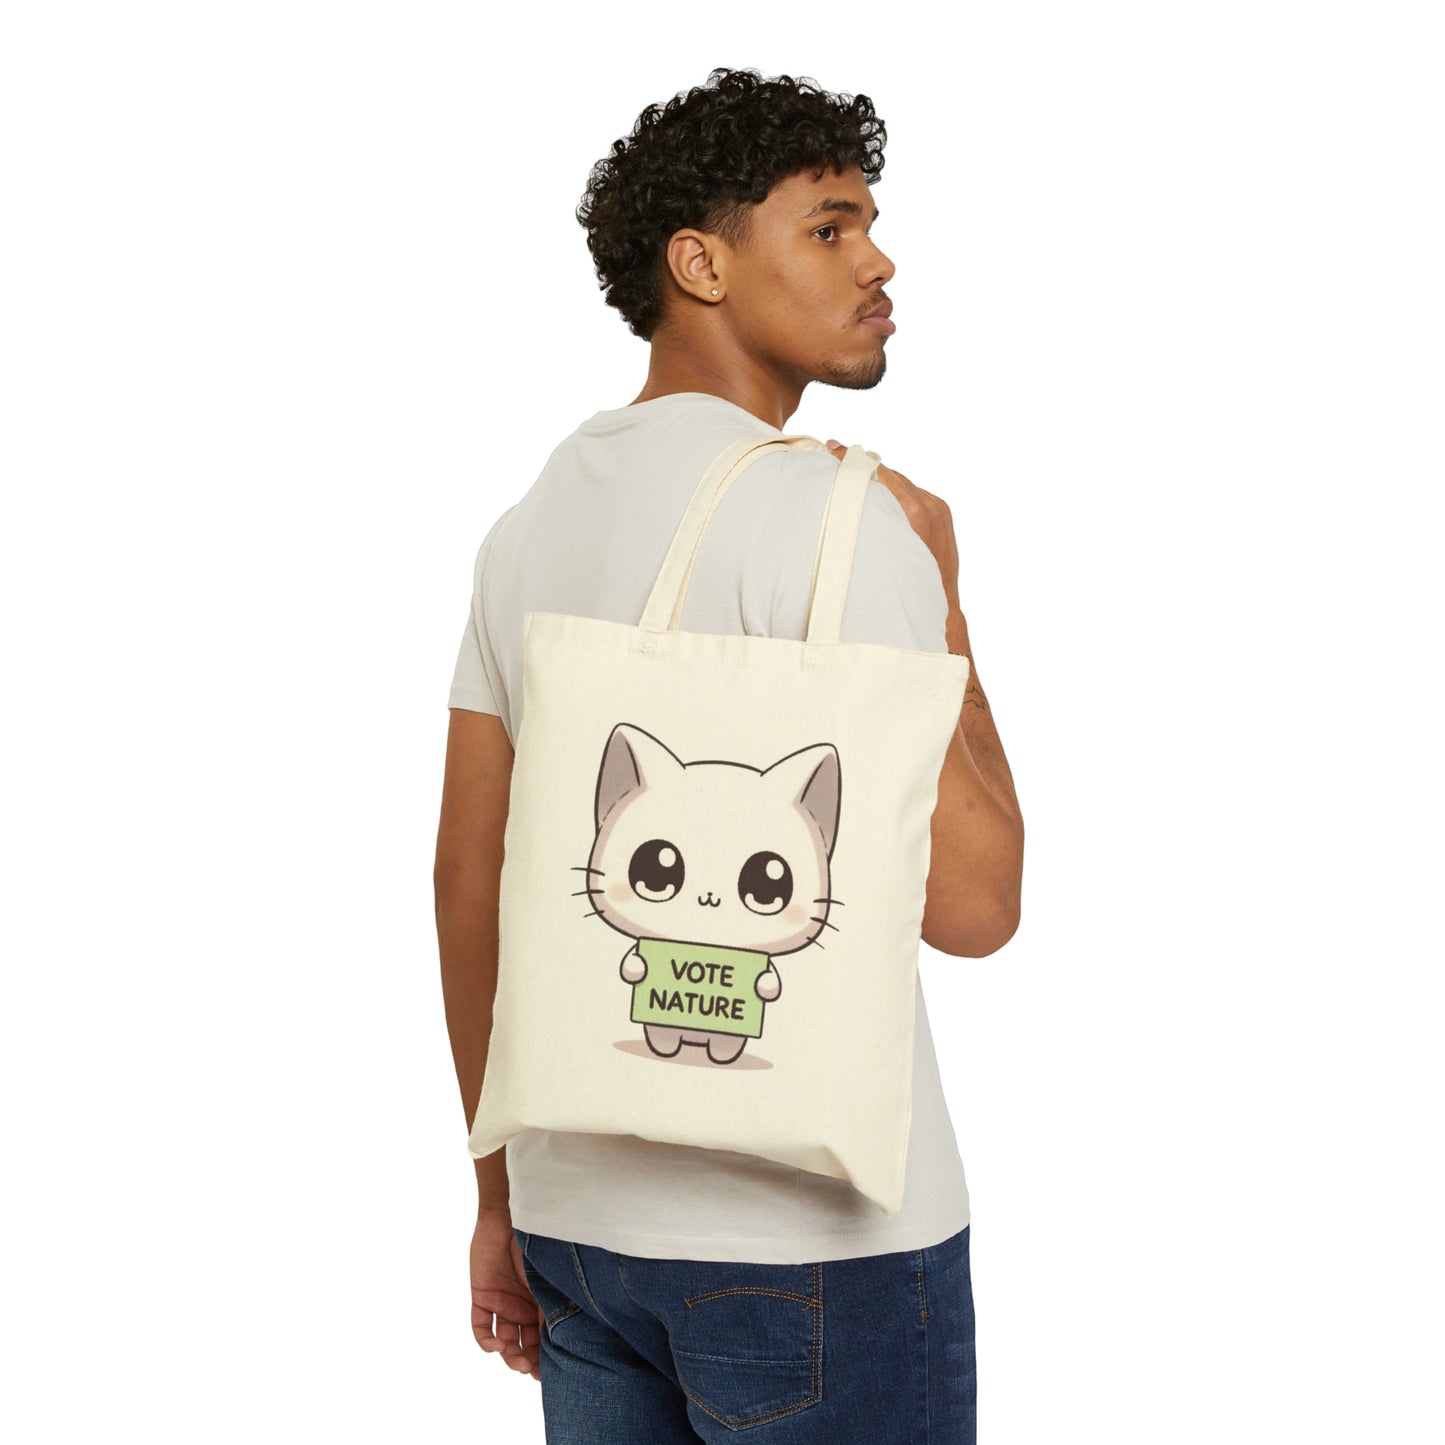 Inspirational Cute Cat Statement Cotton Canvas Tote Bag: Vote Nature! carry a laptop, kindle, phone, notebook, goodies to work/coffee shop